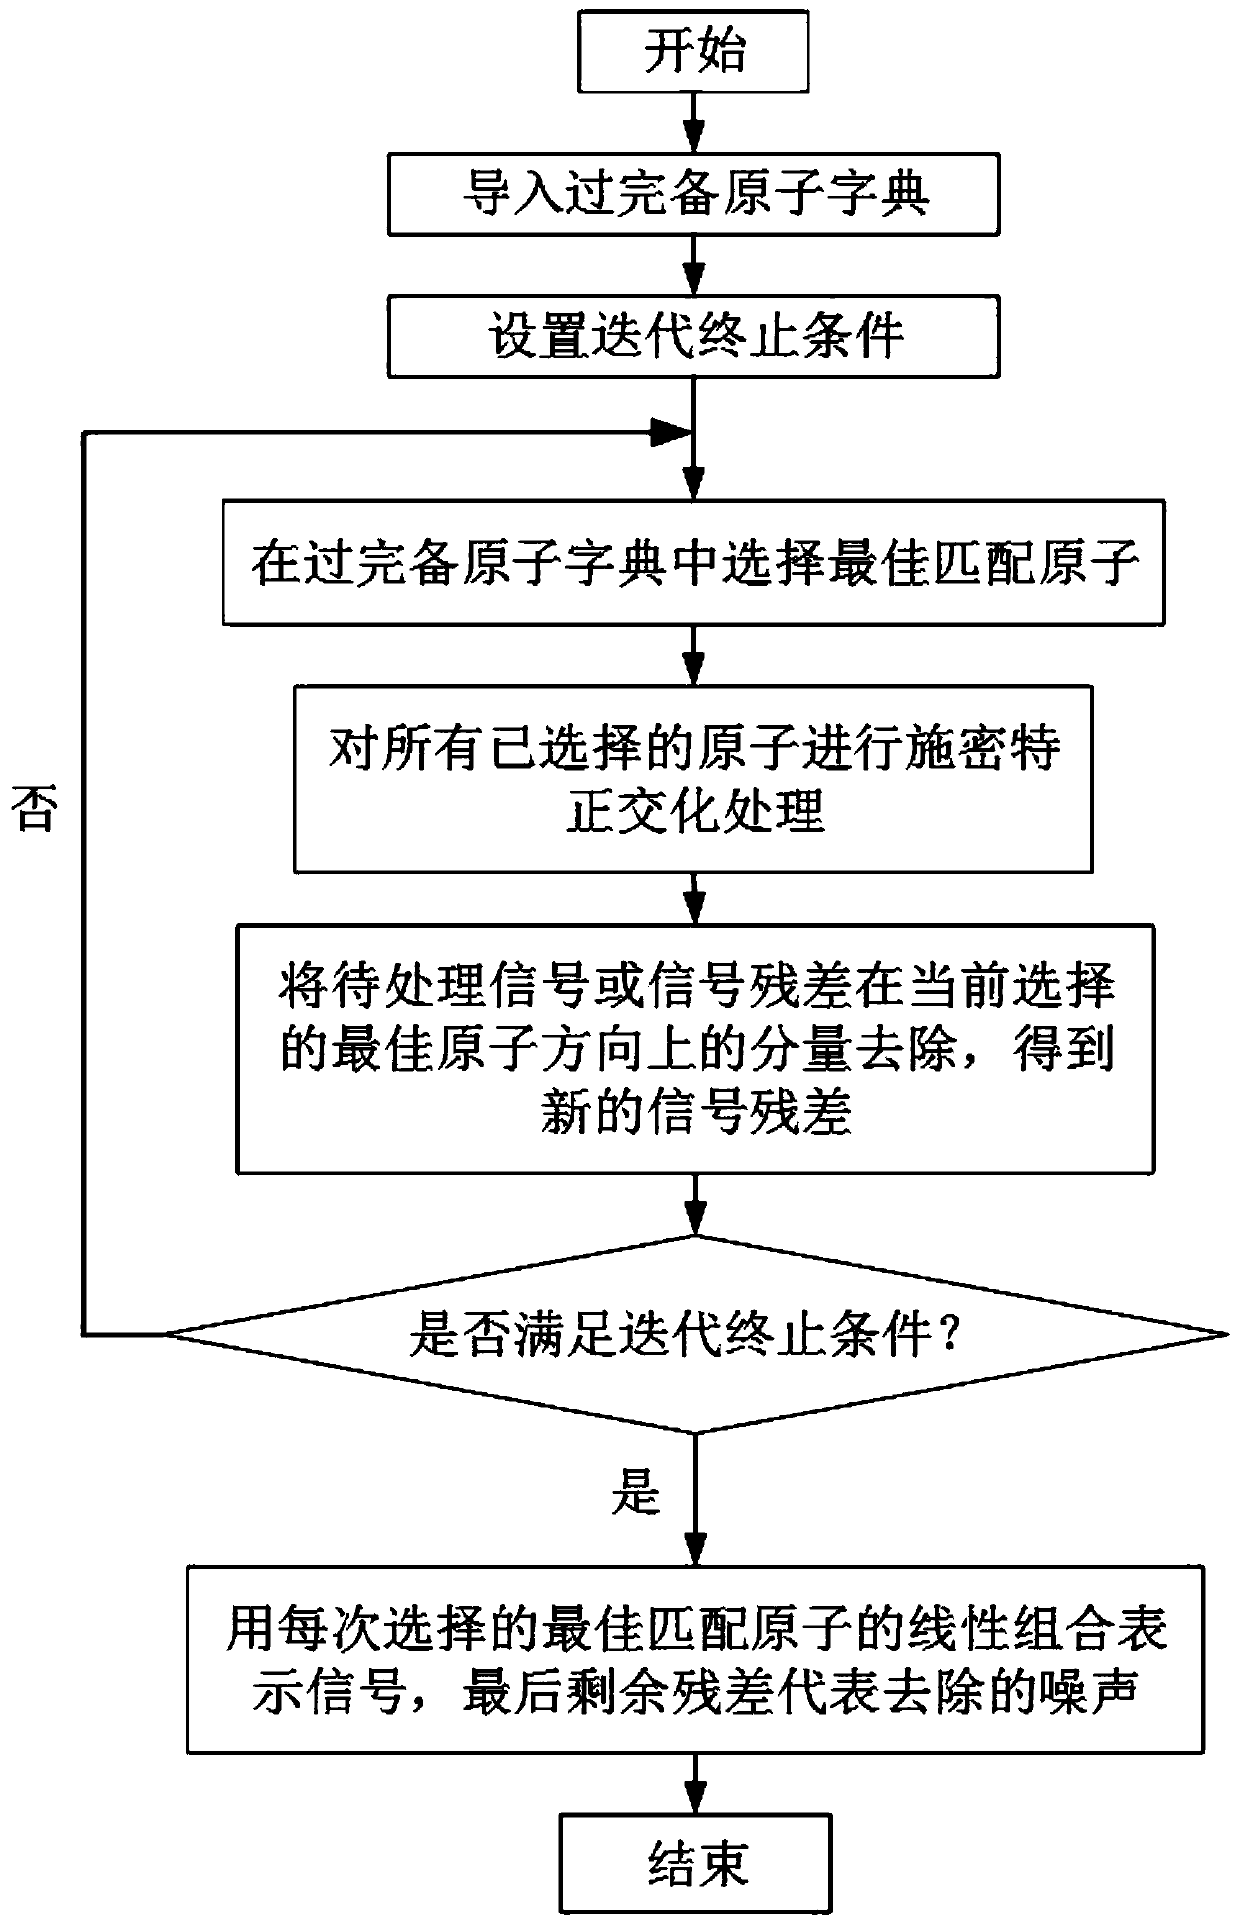 Kernel signal extraction method based on dictionary training and orthogonal matching pursuit